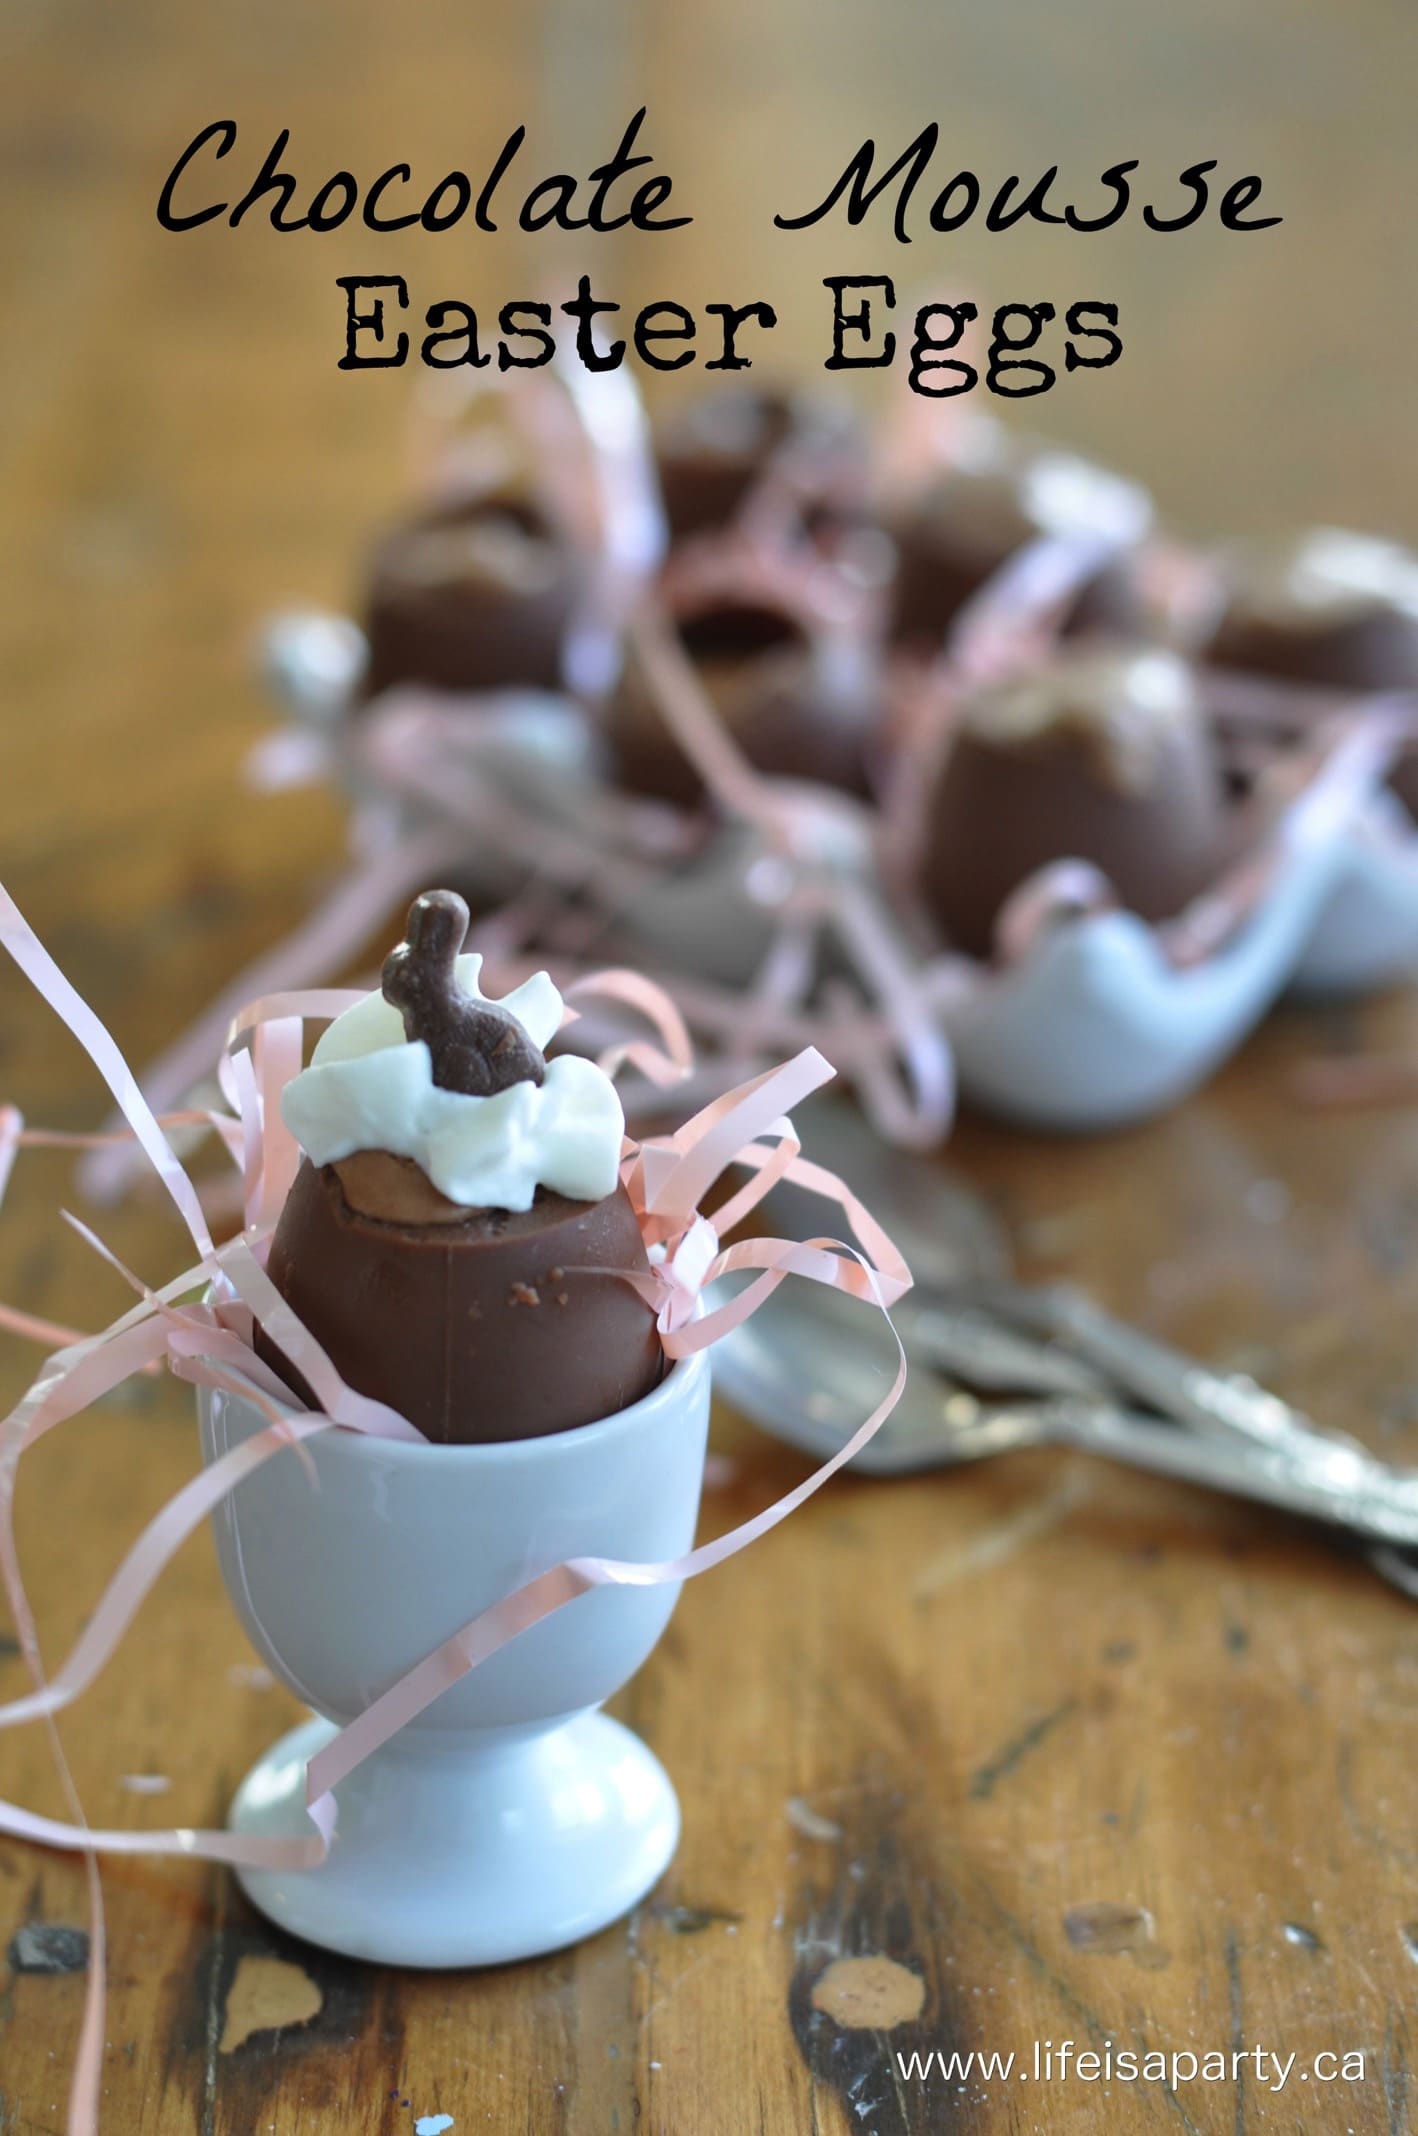 Chocolate Mousse Easter Eggs -Easy Chocolate Mousse Recipe: the perfect Easter dessert, chocolate mousse piped into hollow chocolate Easter eggs.